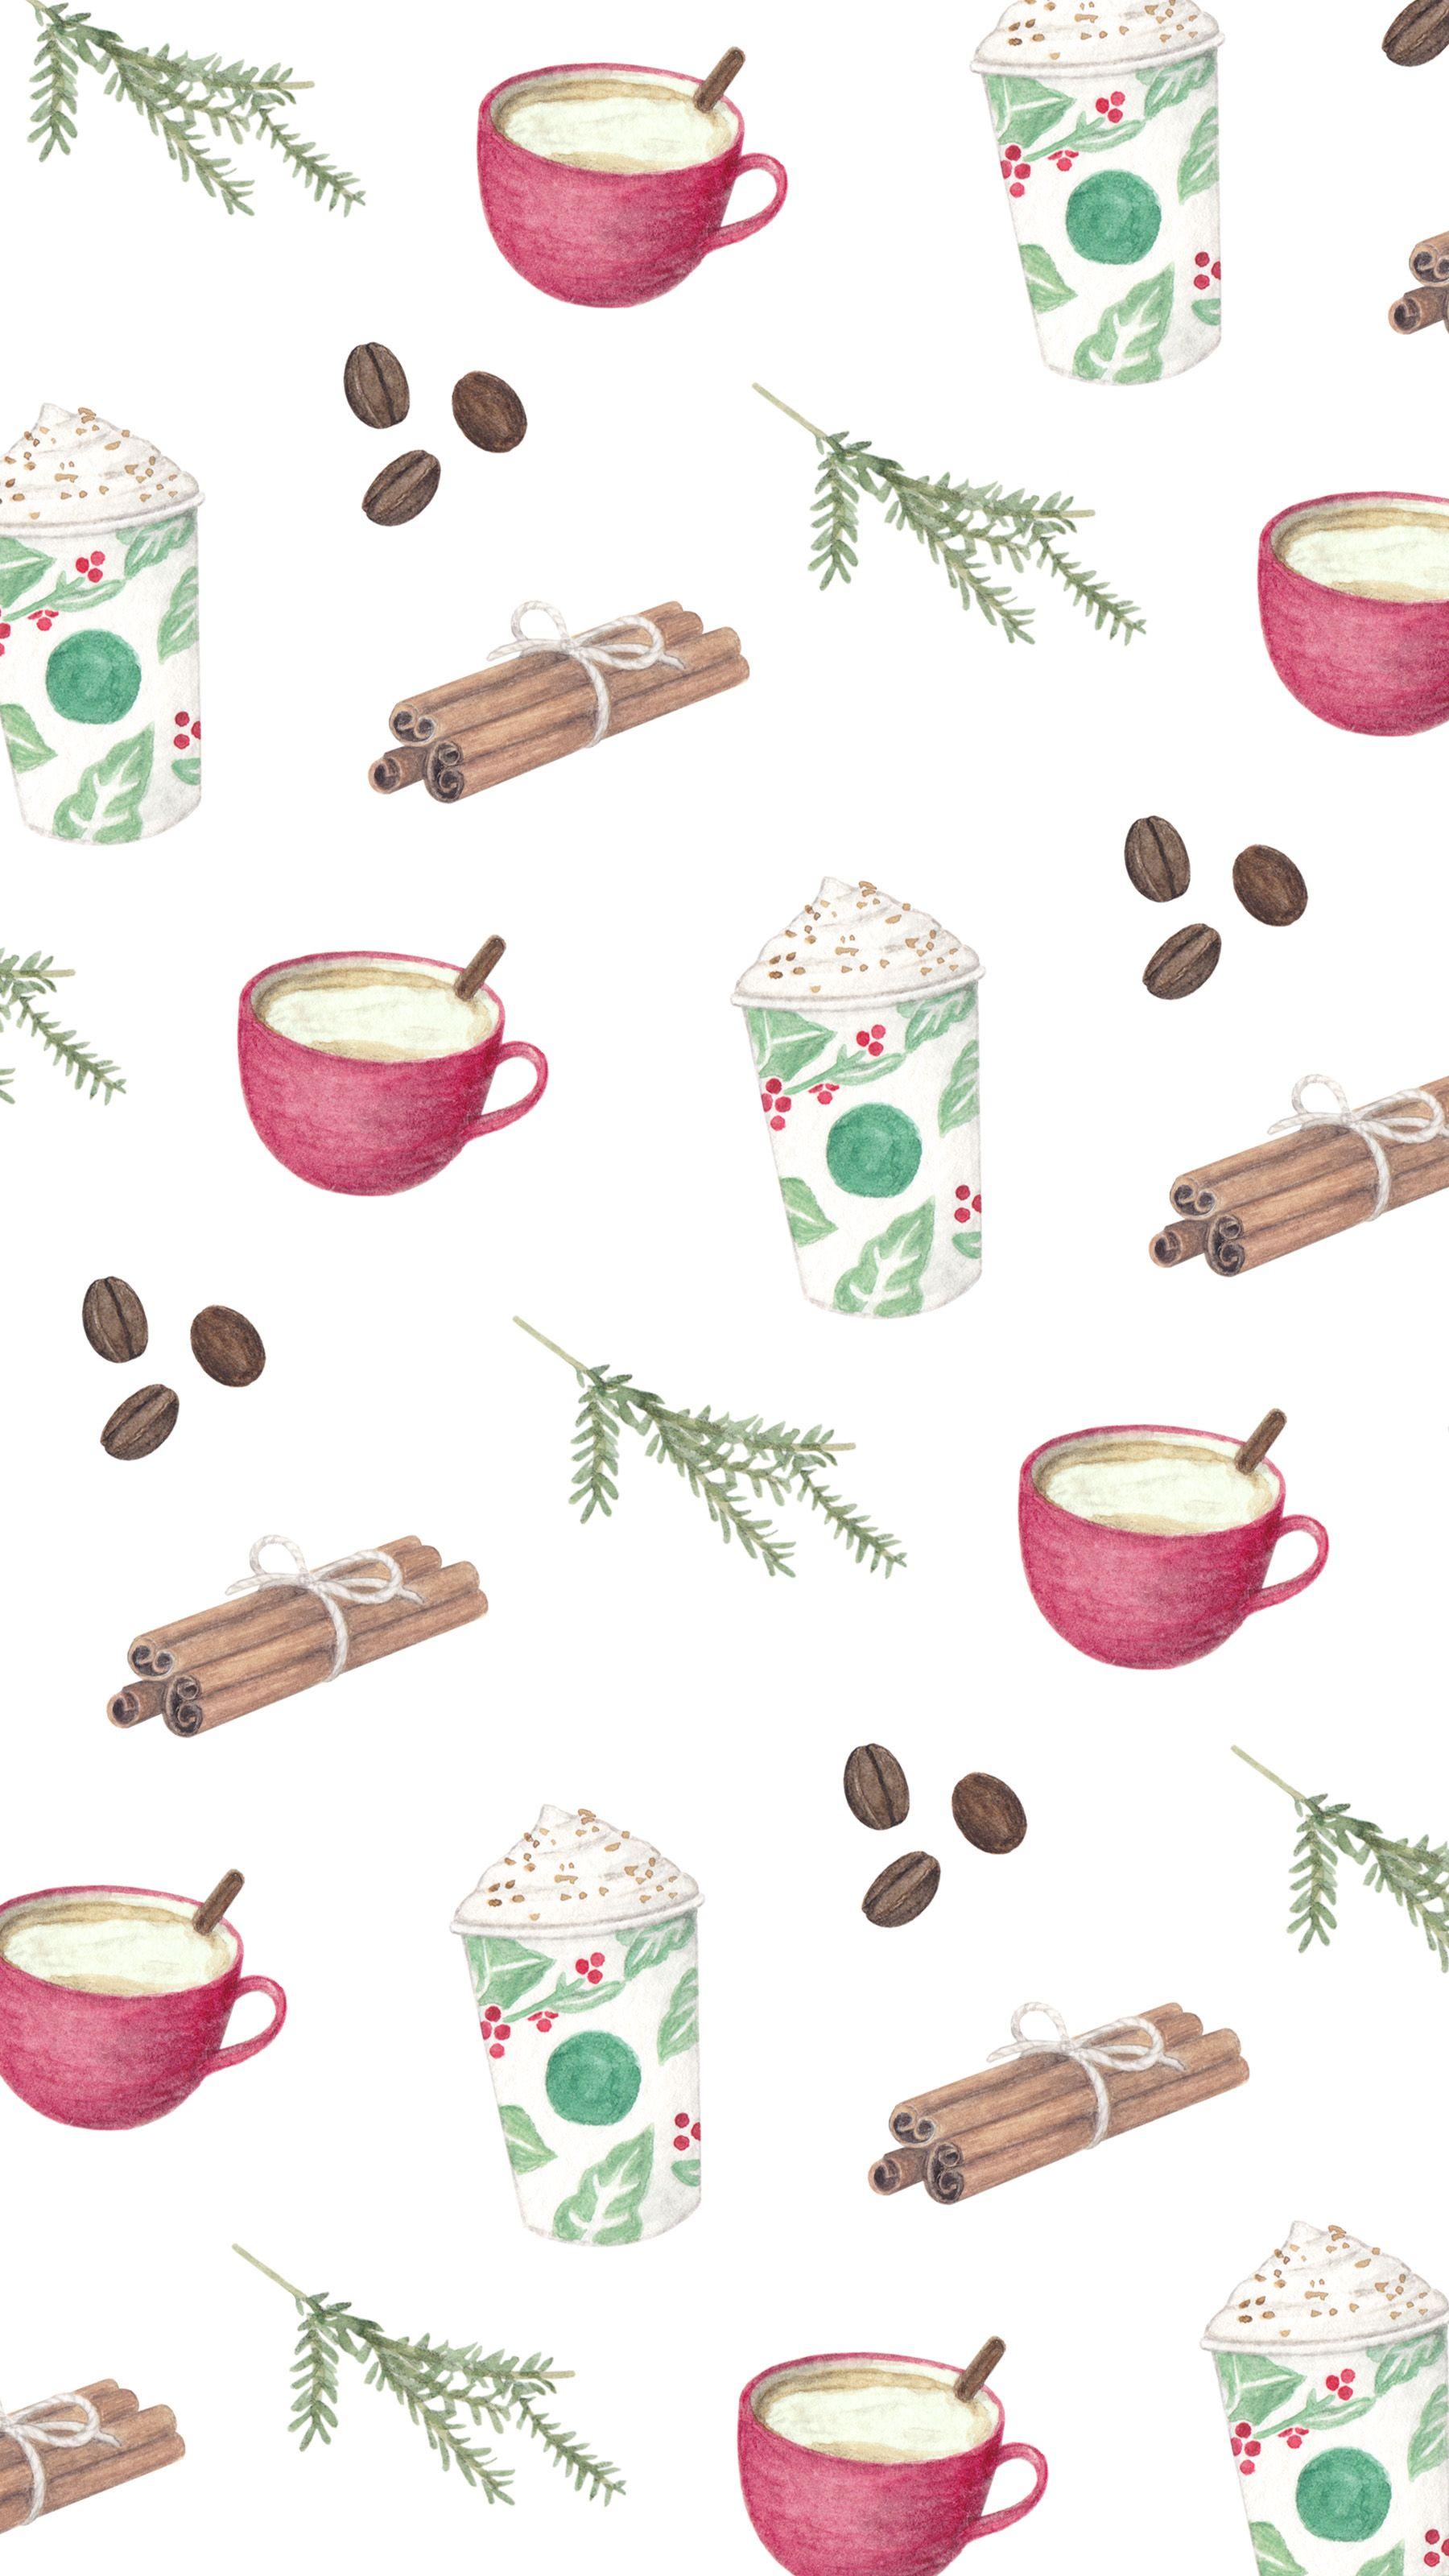 amy zhang creative. starbucks holiday cup pattern. holiday